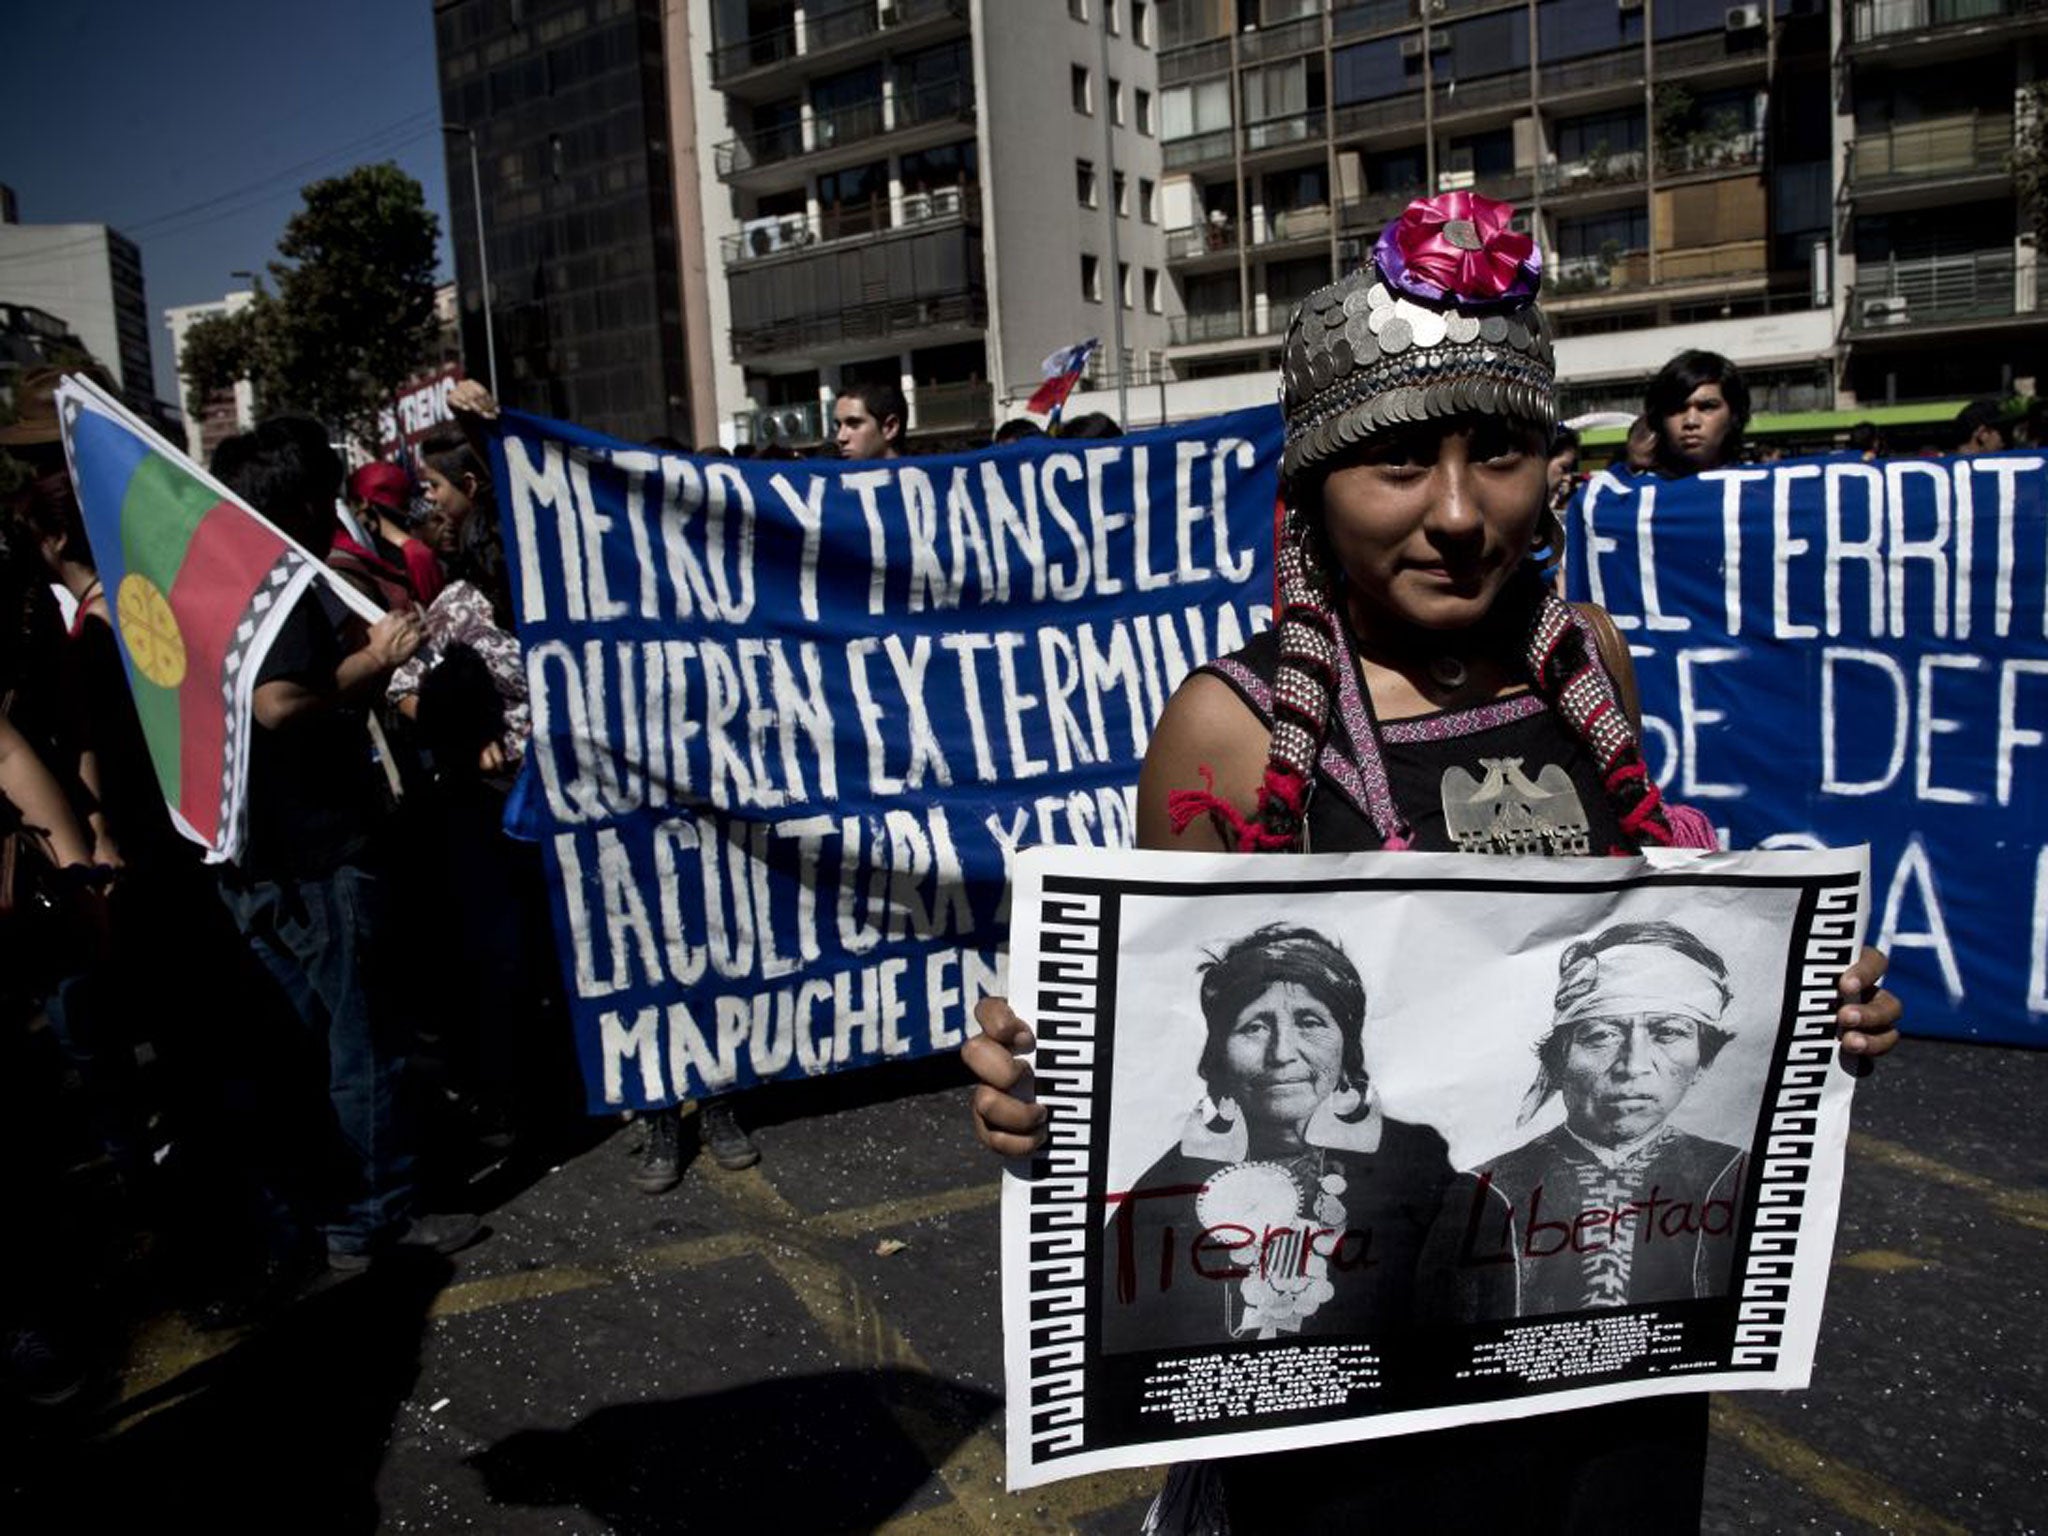 Mapuche protests in Santiago have become common